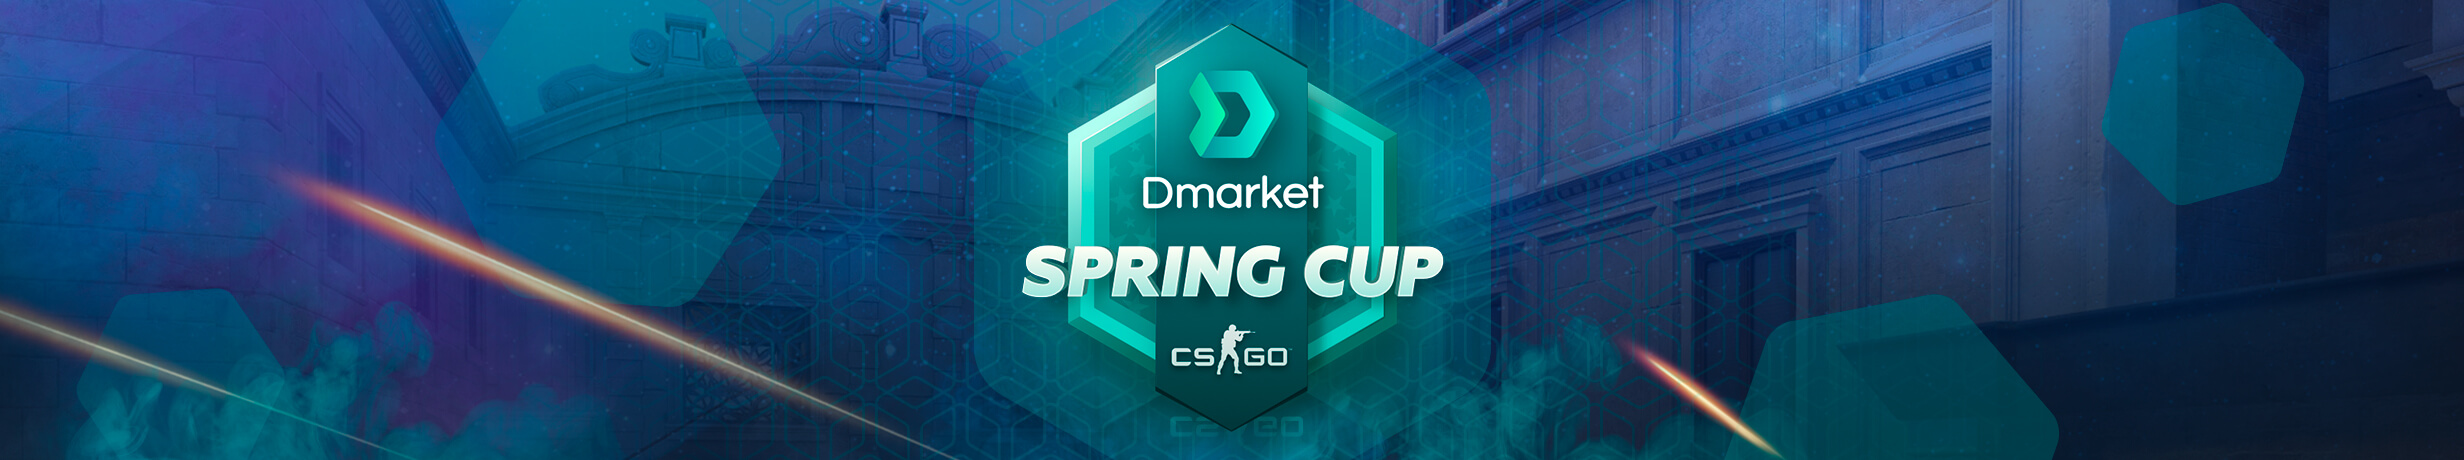 DMarket Spring Cup – The First Pro Championship